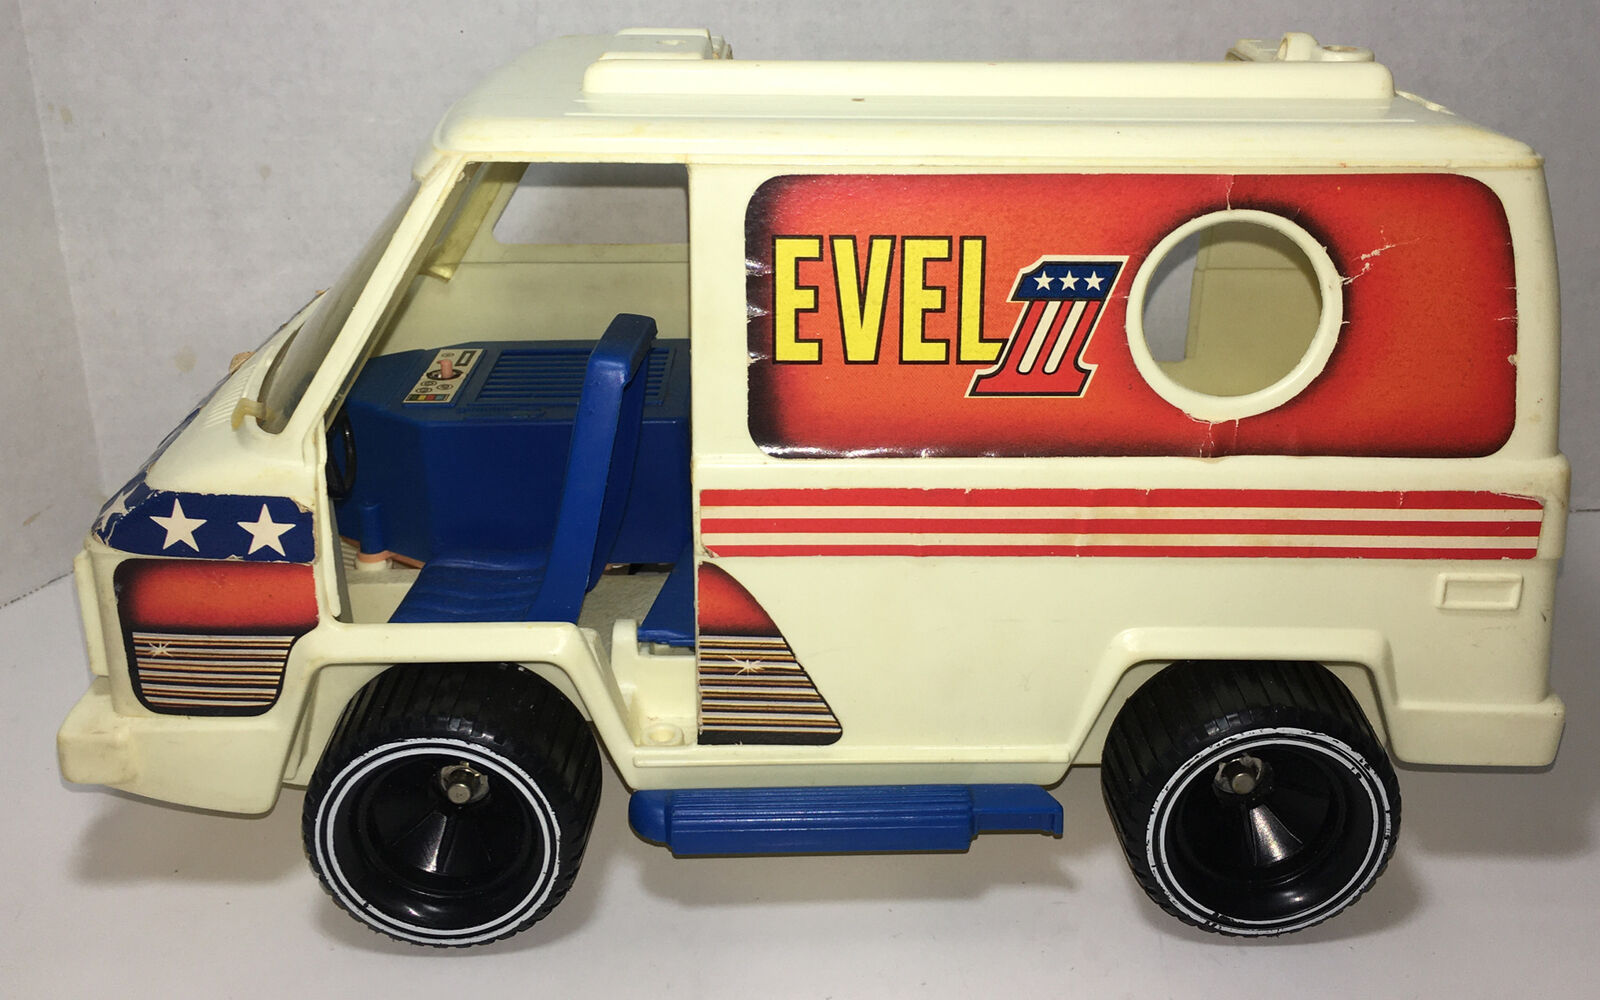 Evel Knievel CB VAN 1977 by Ideal Super Rare (c) Missing Pieces 1P